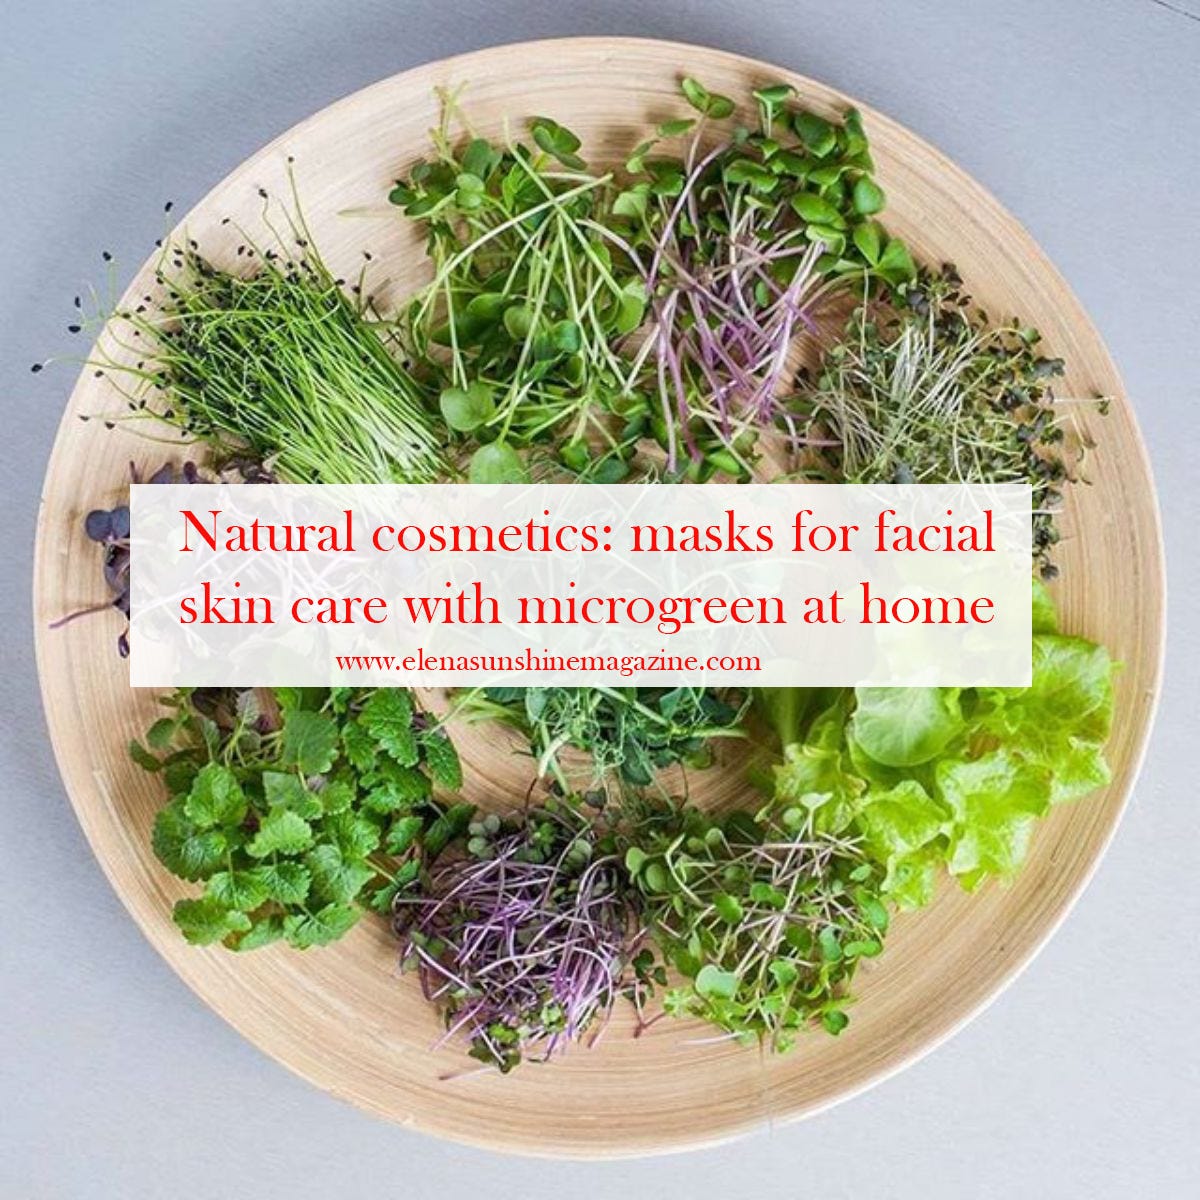 Natural cosmetics masks for facial skin care with microgreen at home by Elena